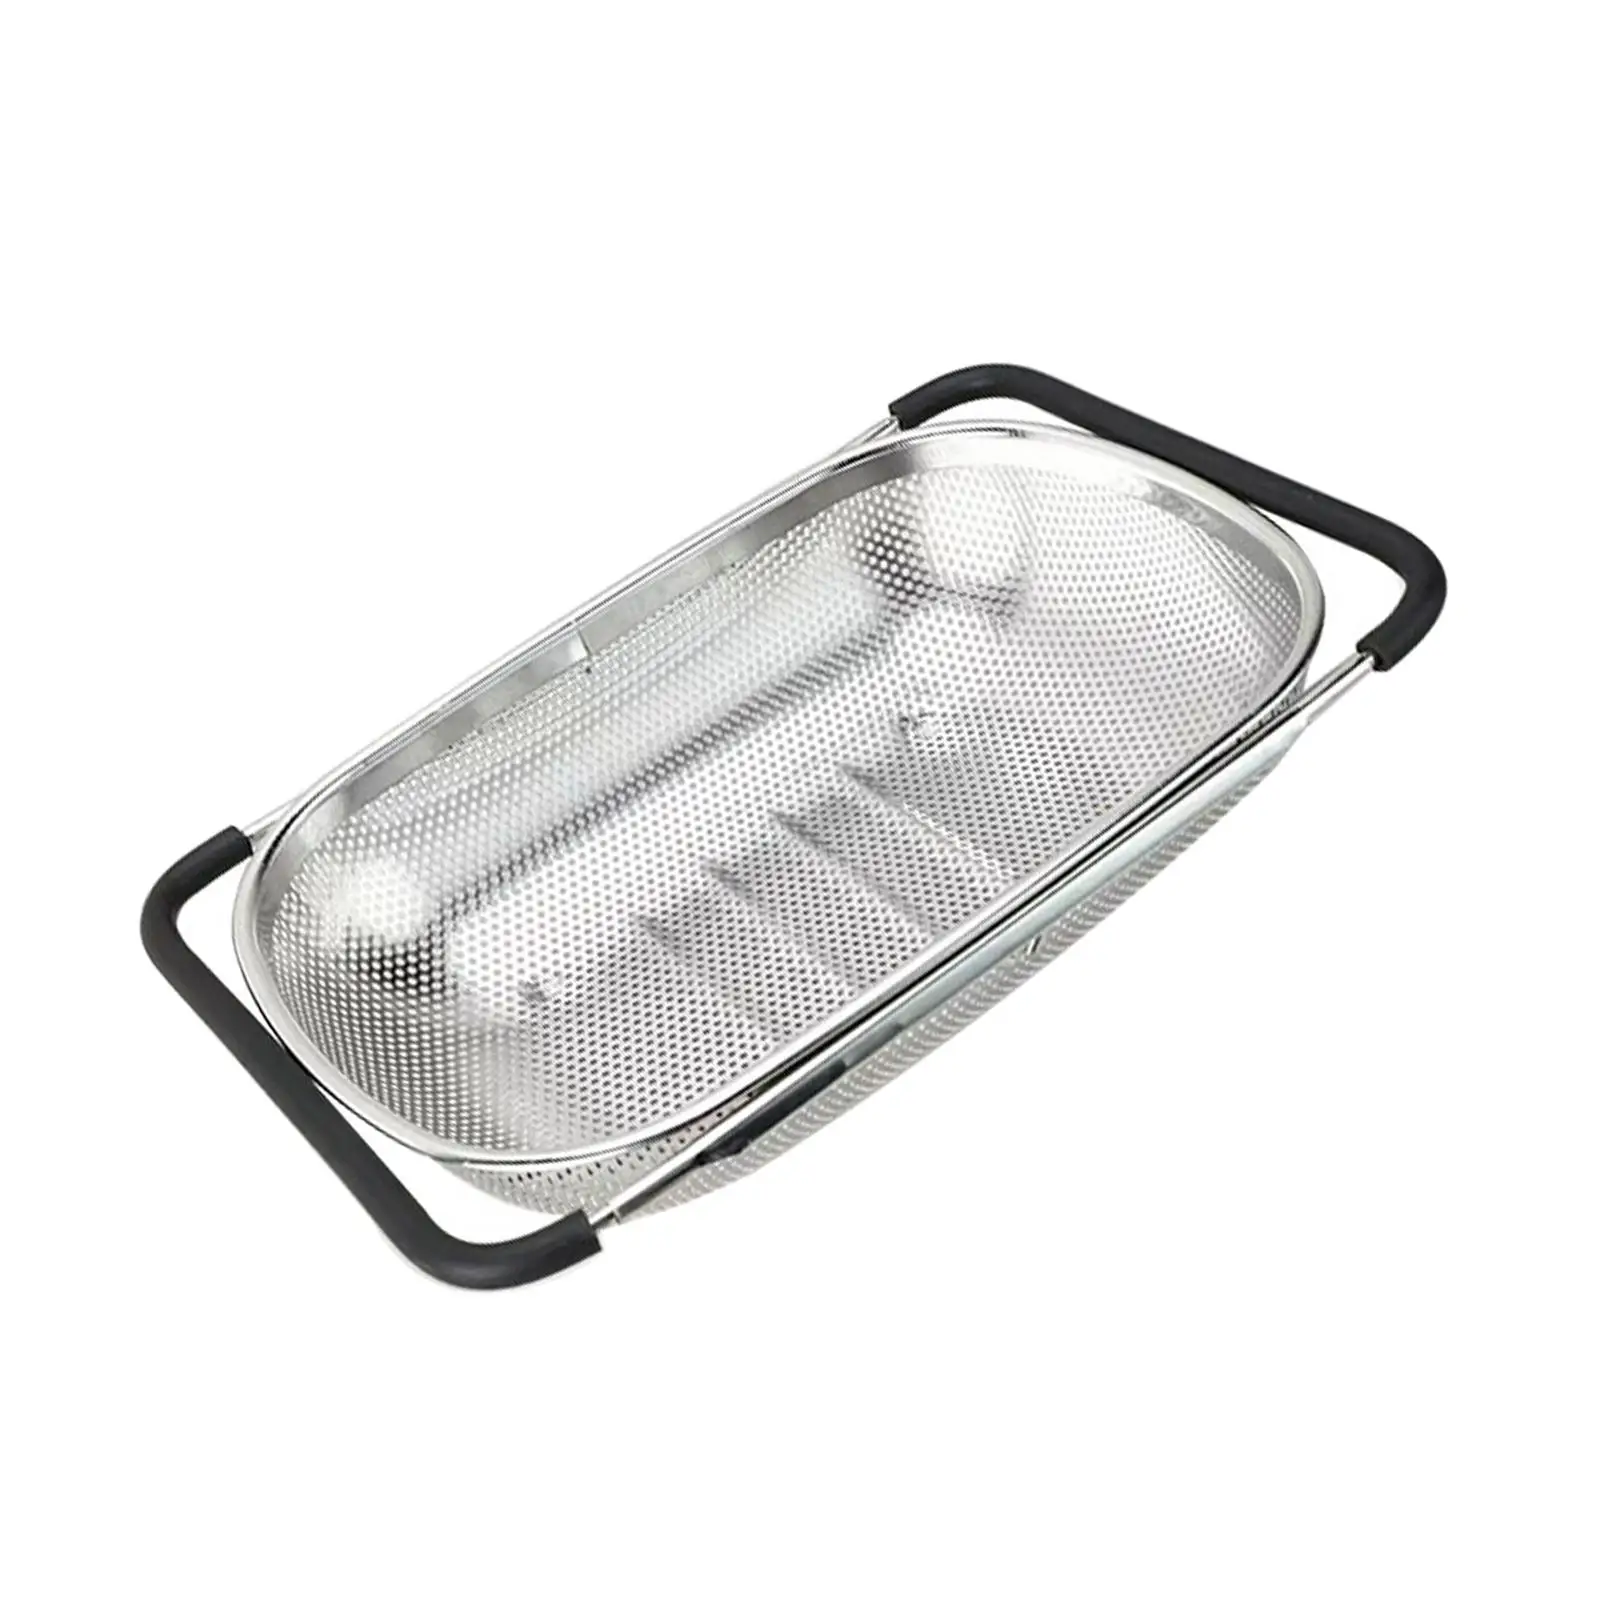 Strainer Basket High Oval for Filtering, Straining Out Impurities Strainer Basket Extendable Handles